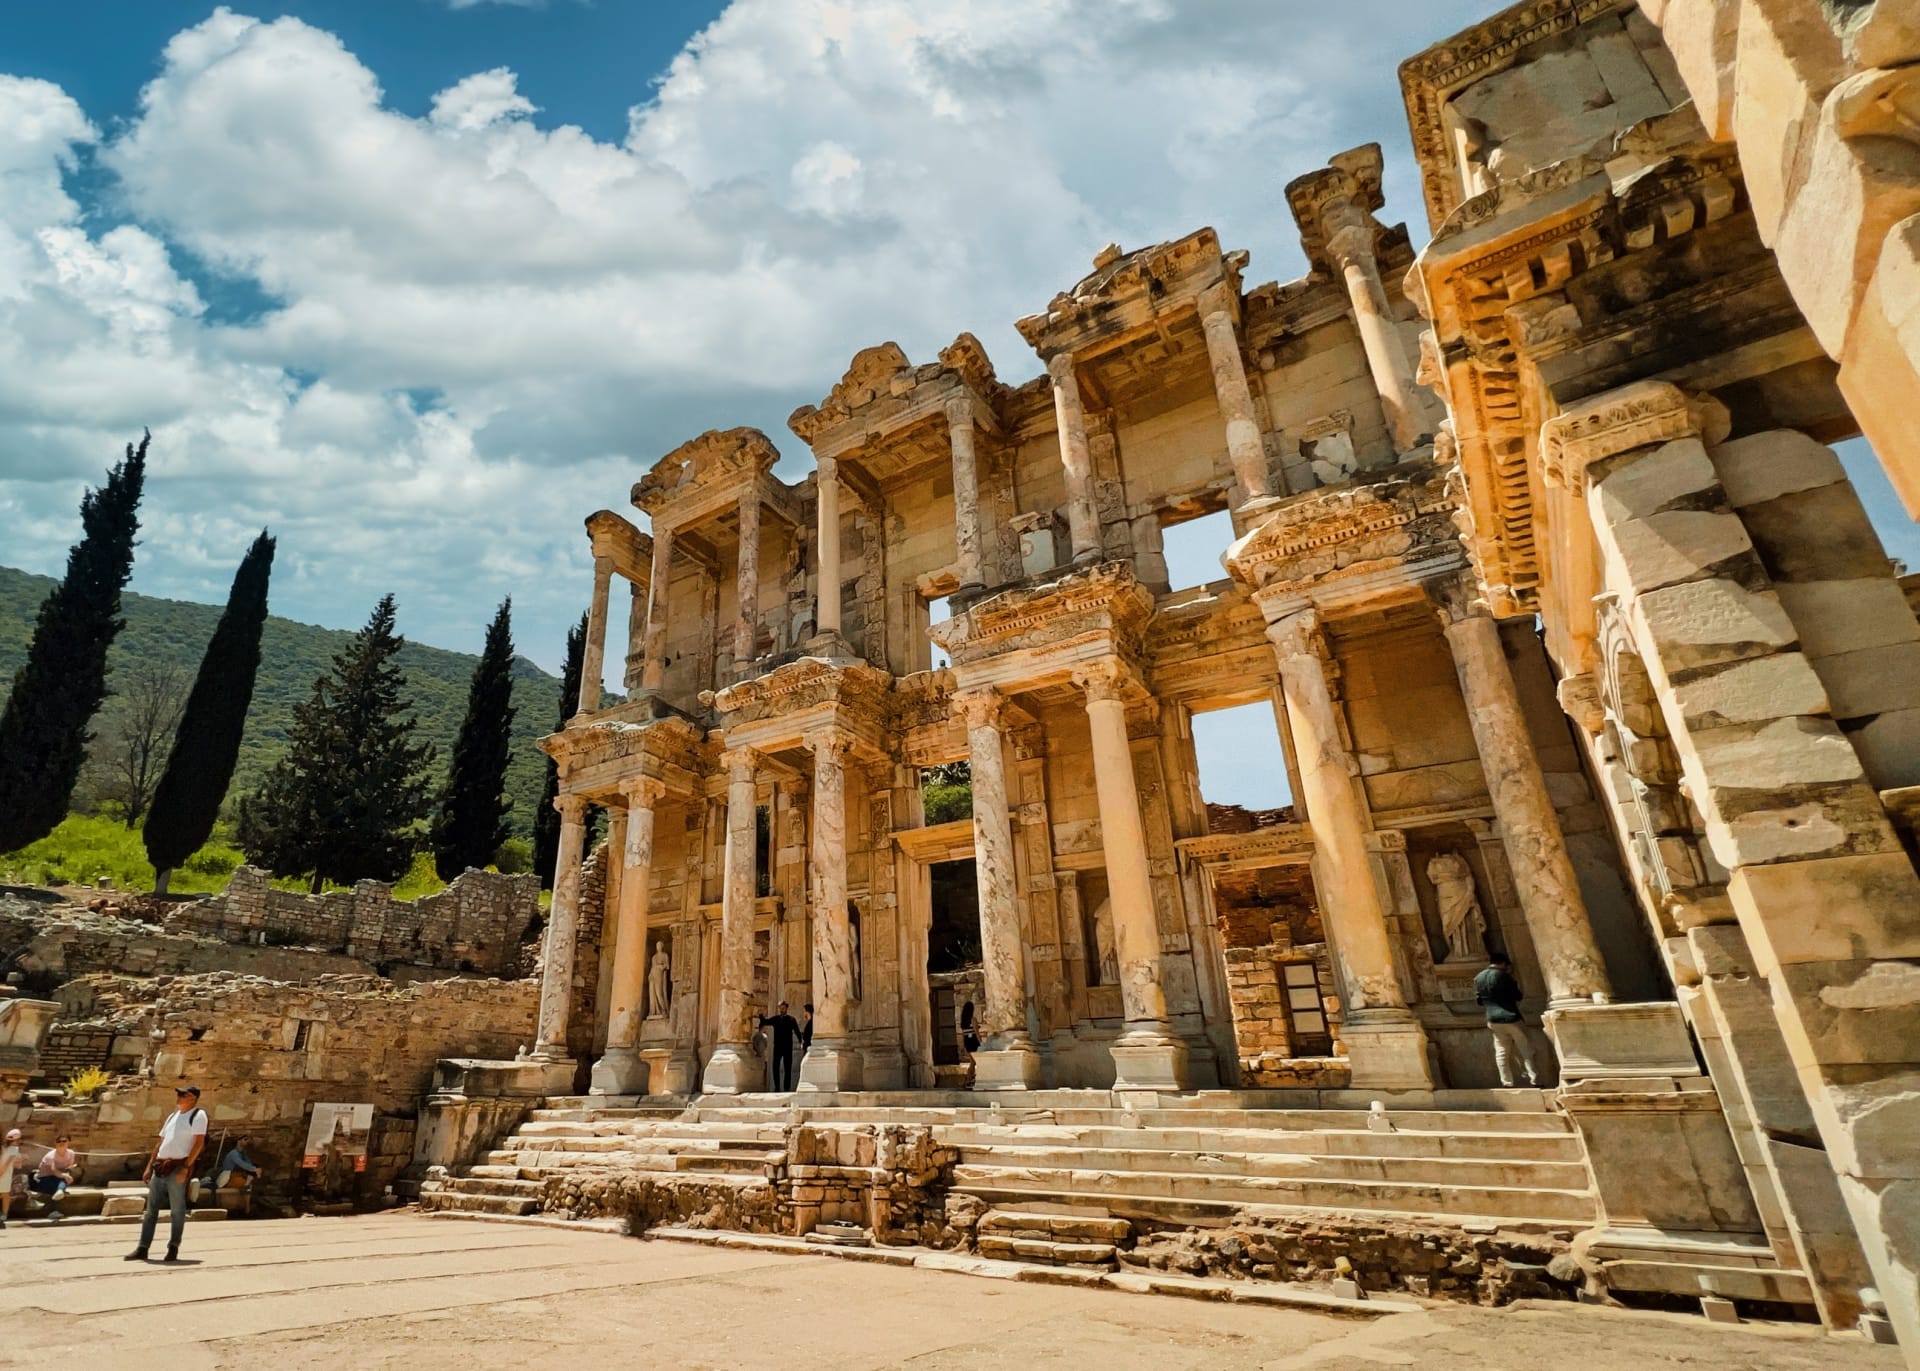 Turkey’s ancient city of Ephesus is so intact, the locals probably don’t know the Roman Empire fell yet.